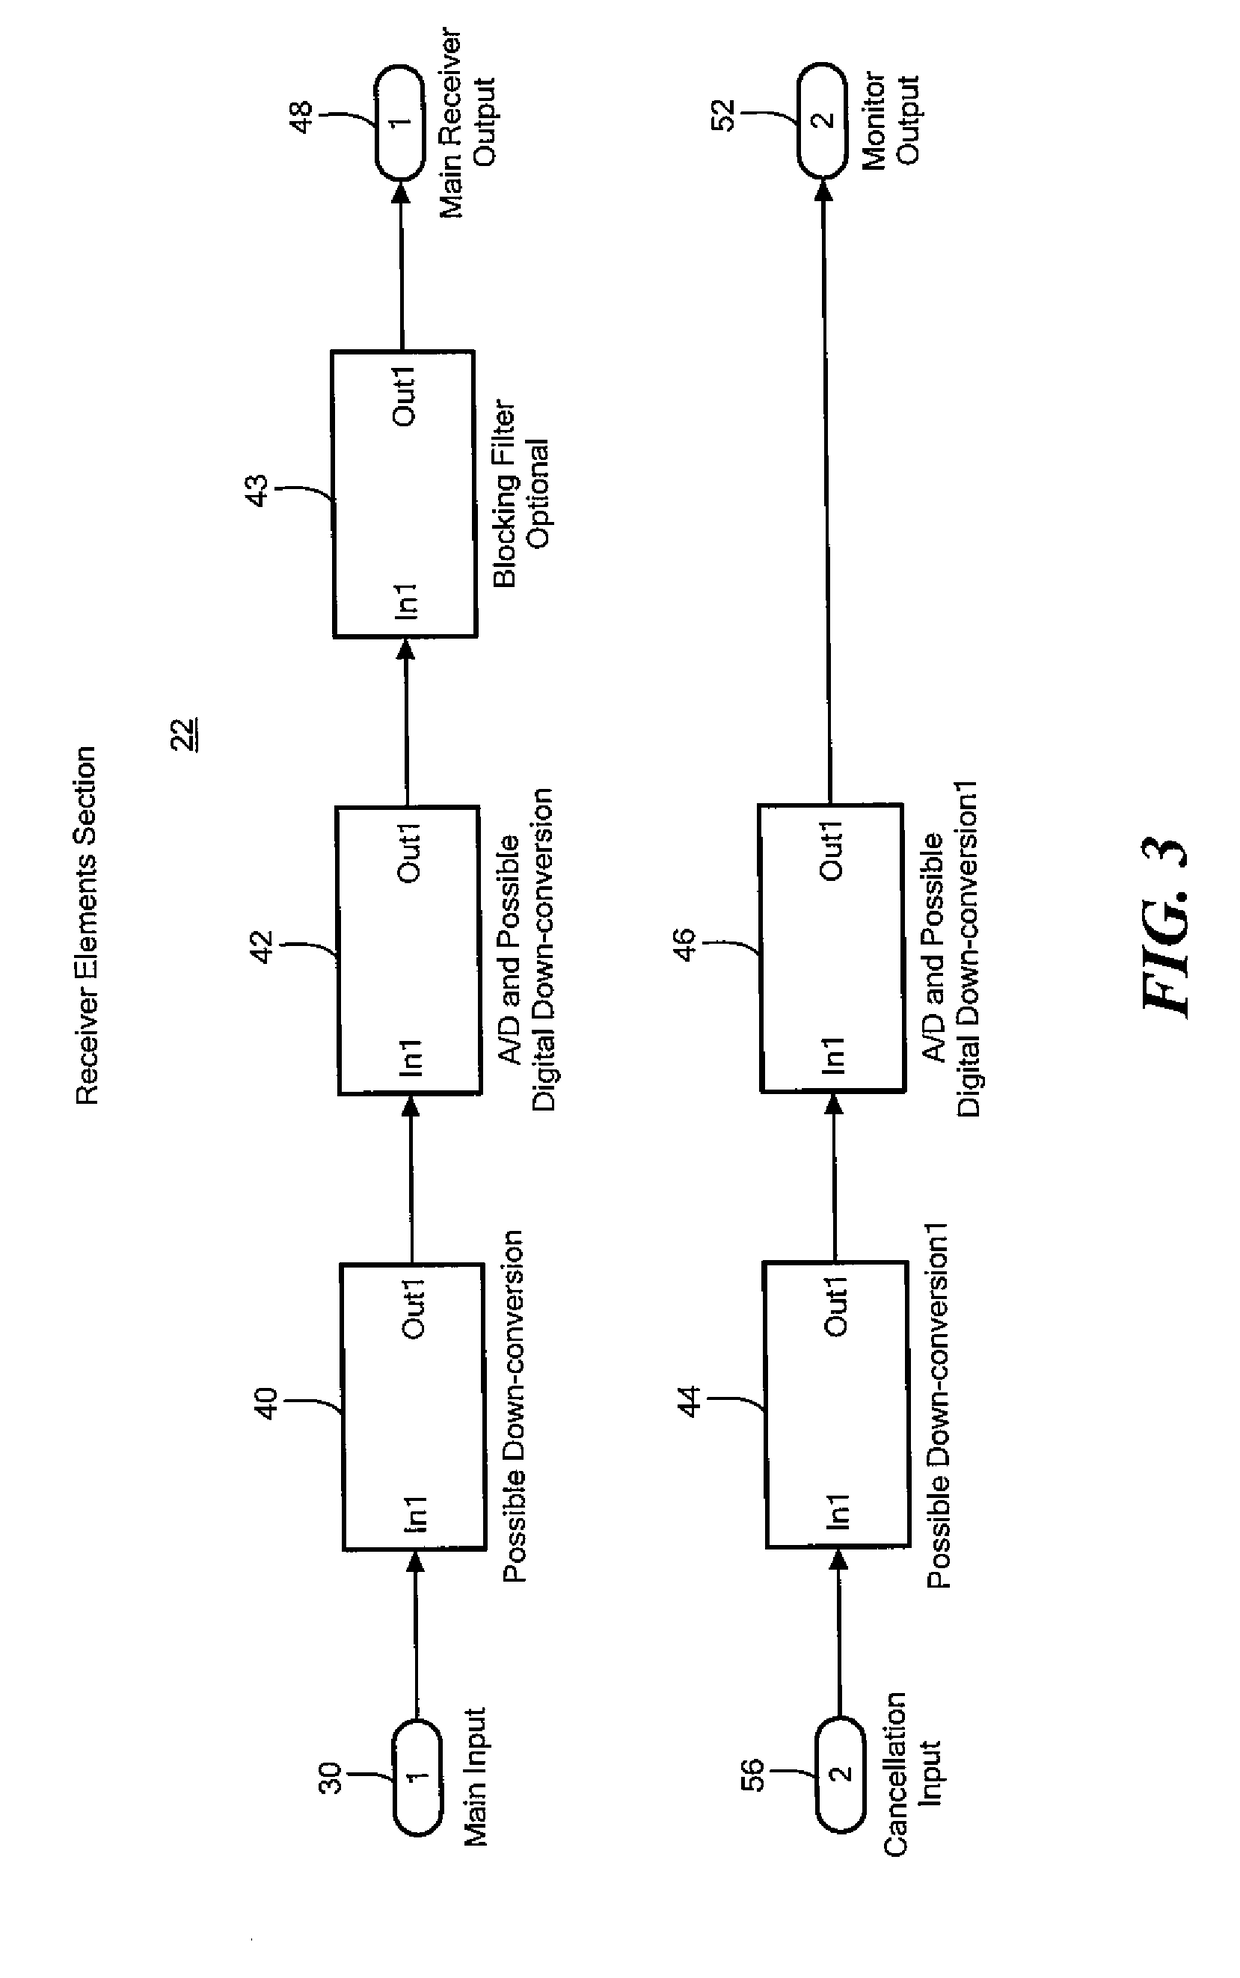 Acoustic and RF cancellation systems and methods